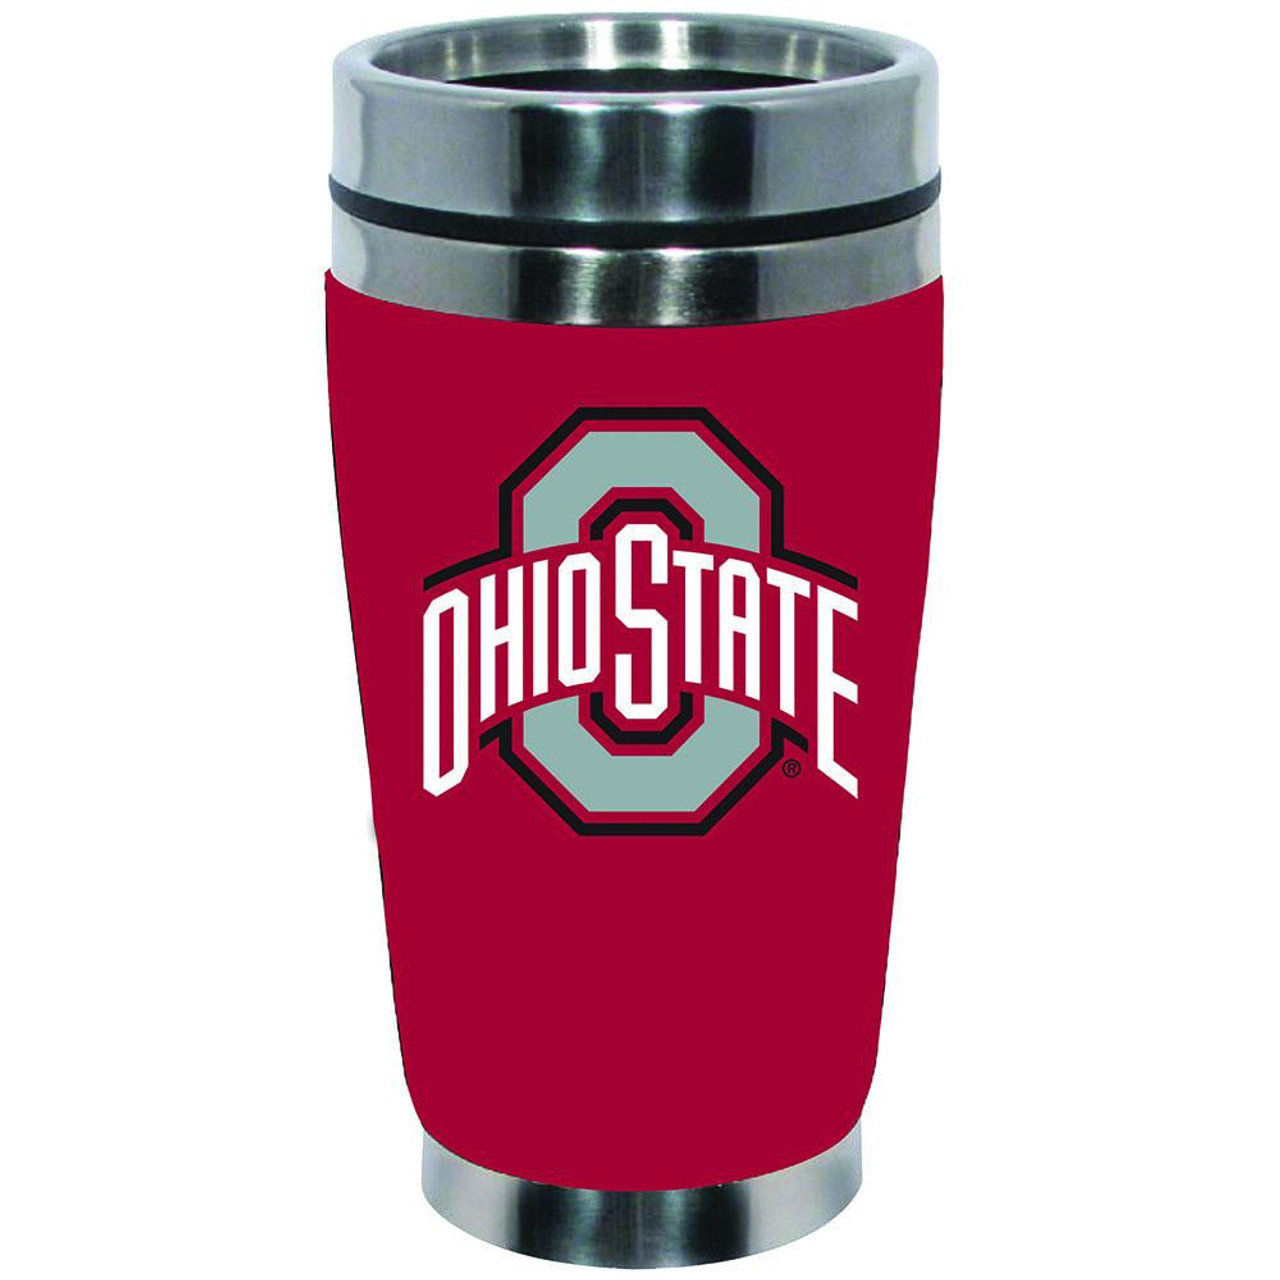 https://cdn11.bigcommerce.com/s-qq5h9nclzt/images/stencil/1280x1280/products/239073/197405/ohio-state-buckeyes-16-oz-stainless-steel-travel-mug_mainProductImage_Full__29138.1691177410.jpg?c=1